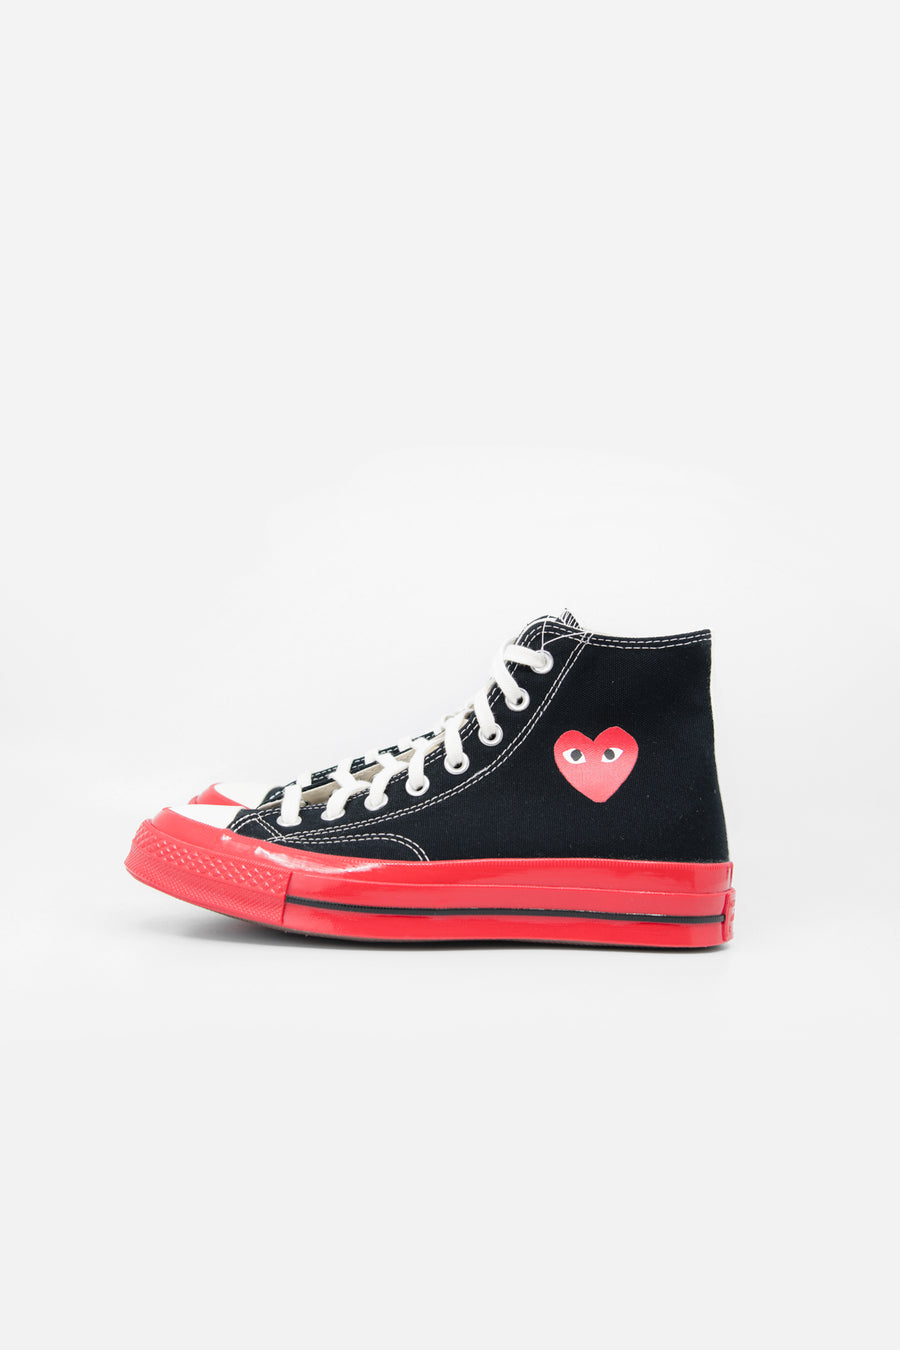 PLAY Red Sole Chuck Taylor High Black K124-001-1